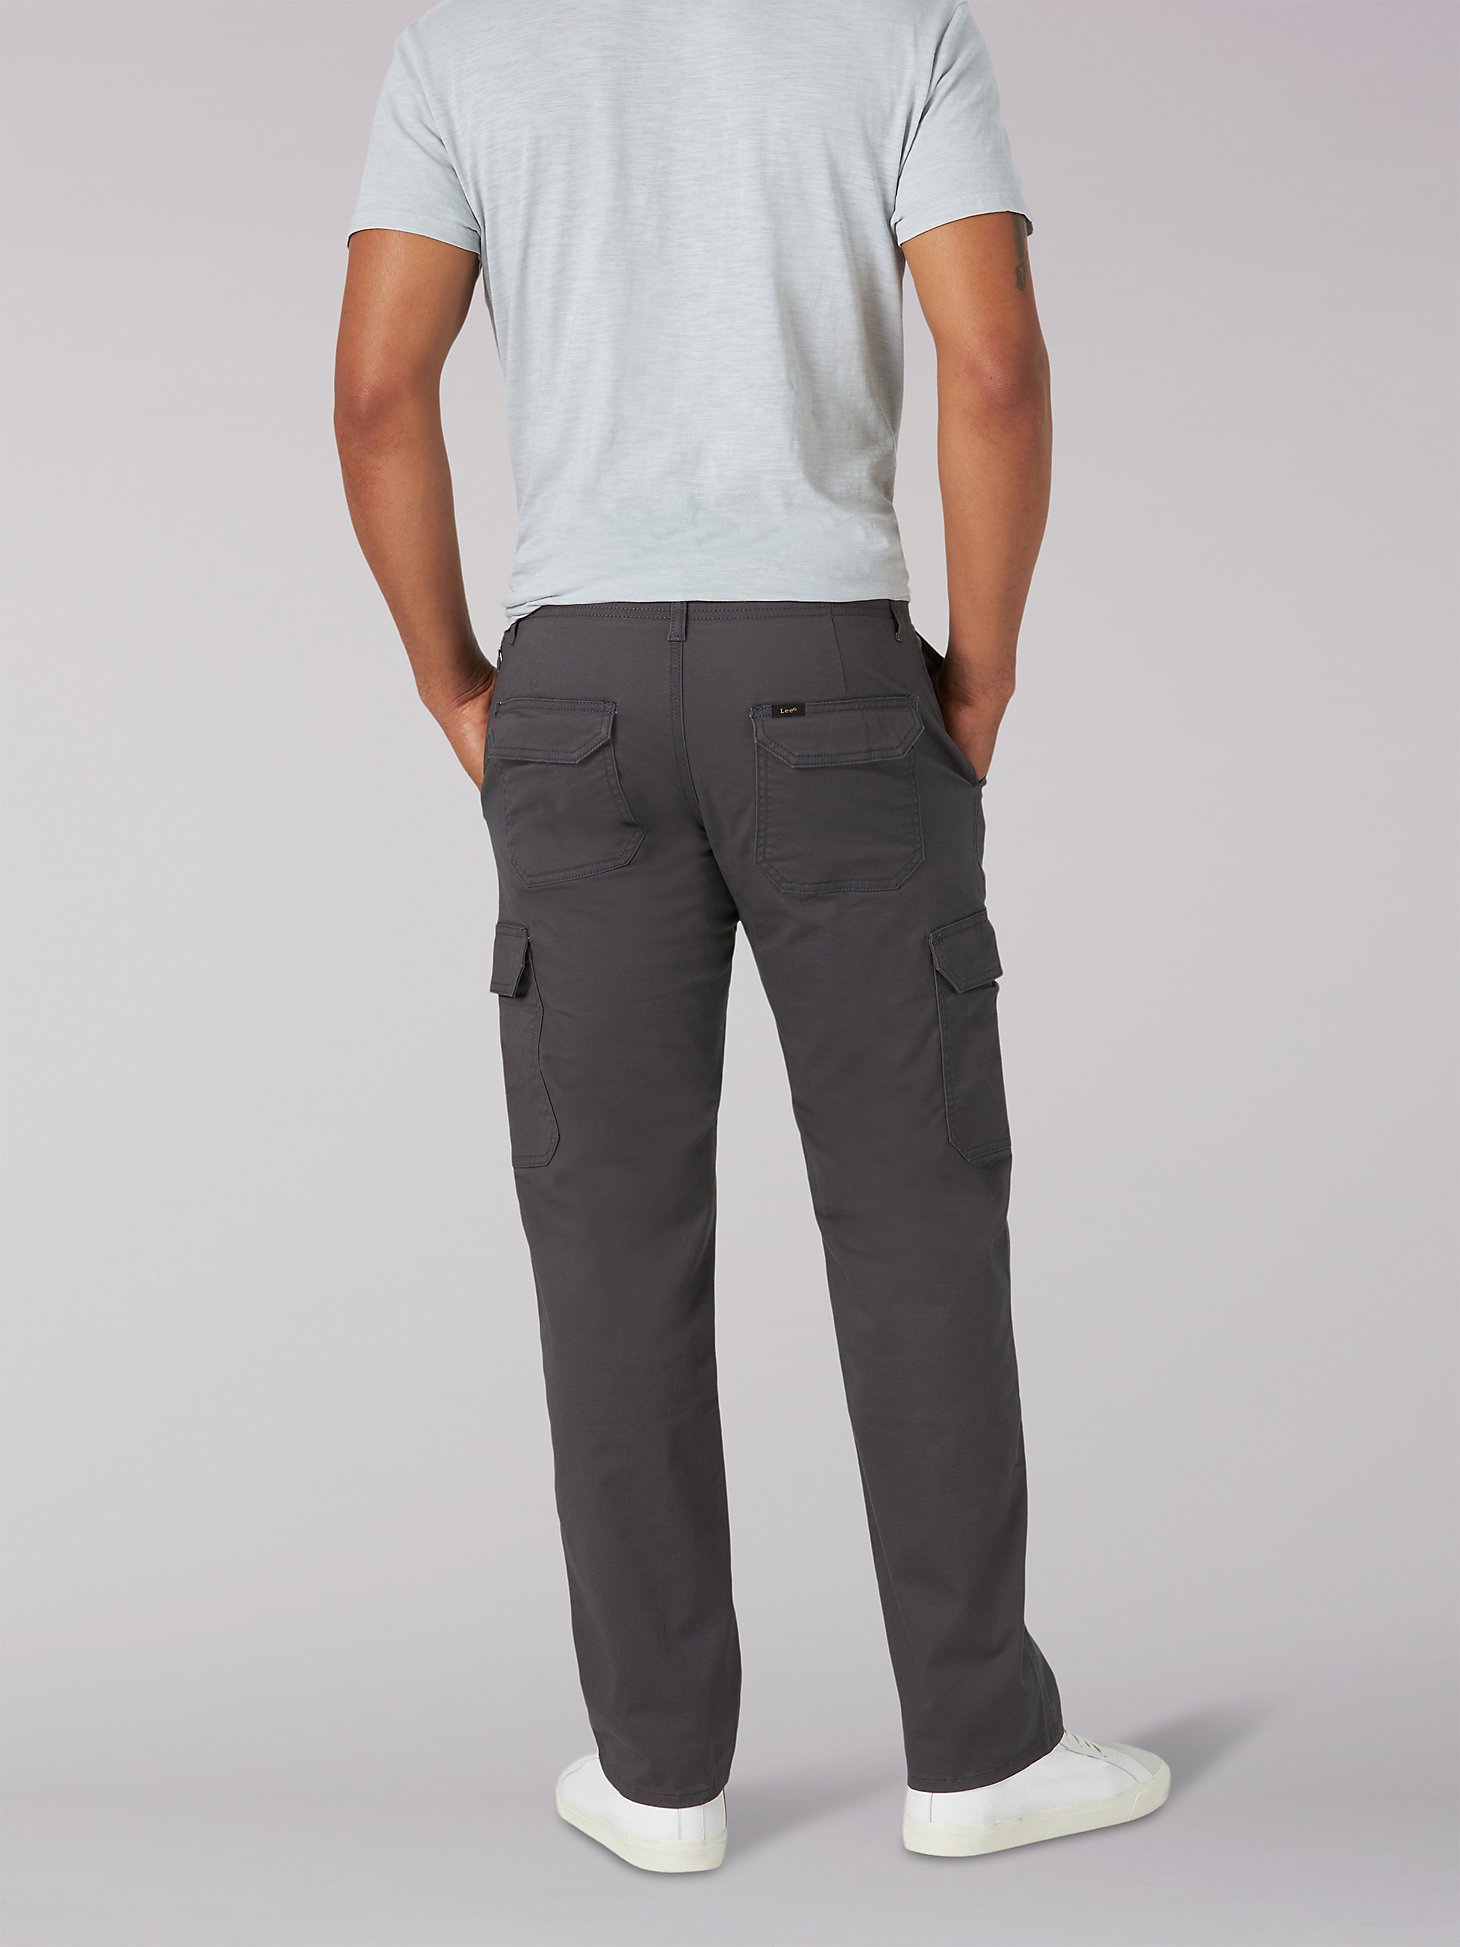 Men's Extreme Comfort Cargo Twill Pant in Charcoal alternative view 1